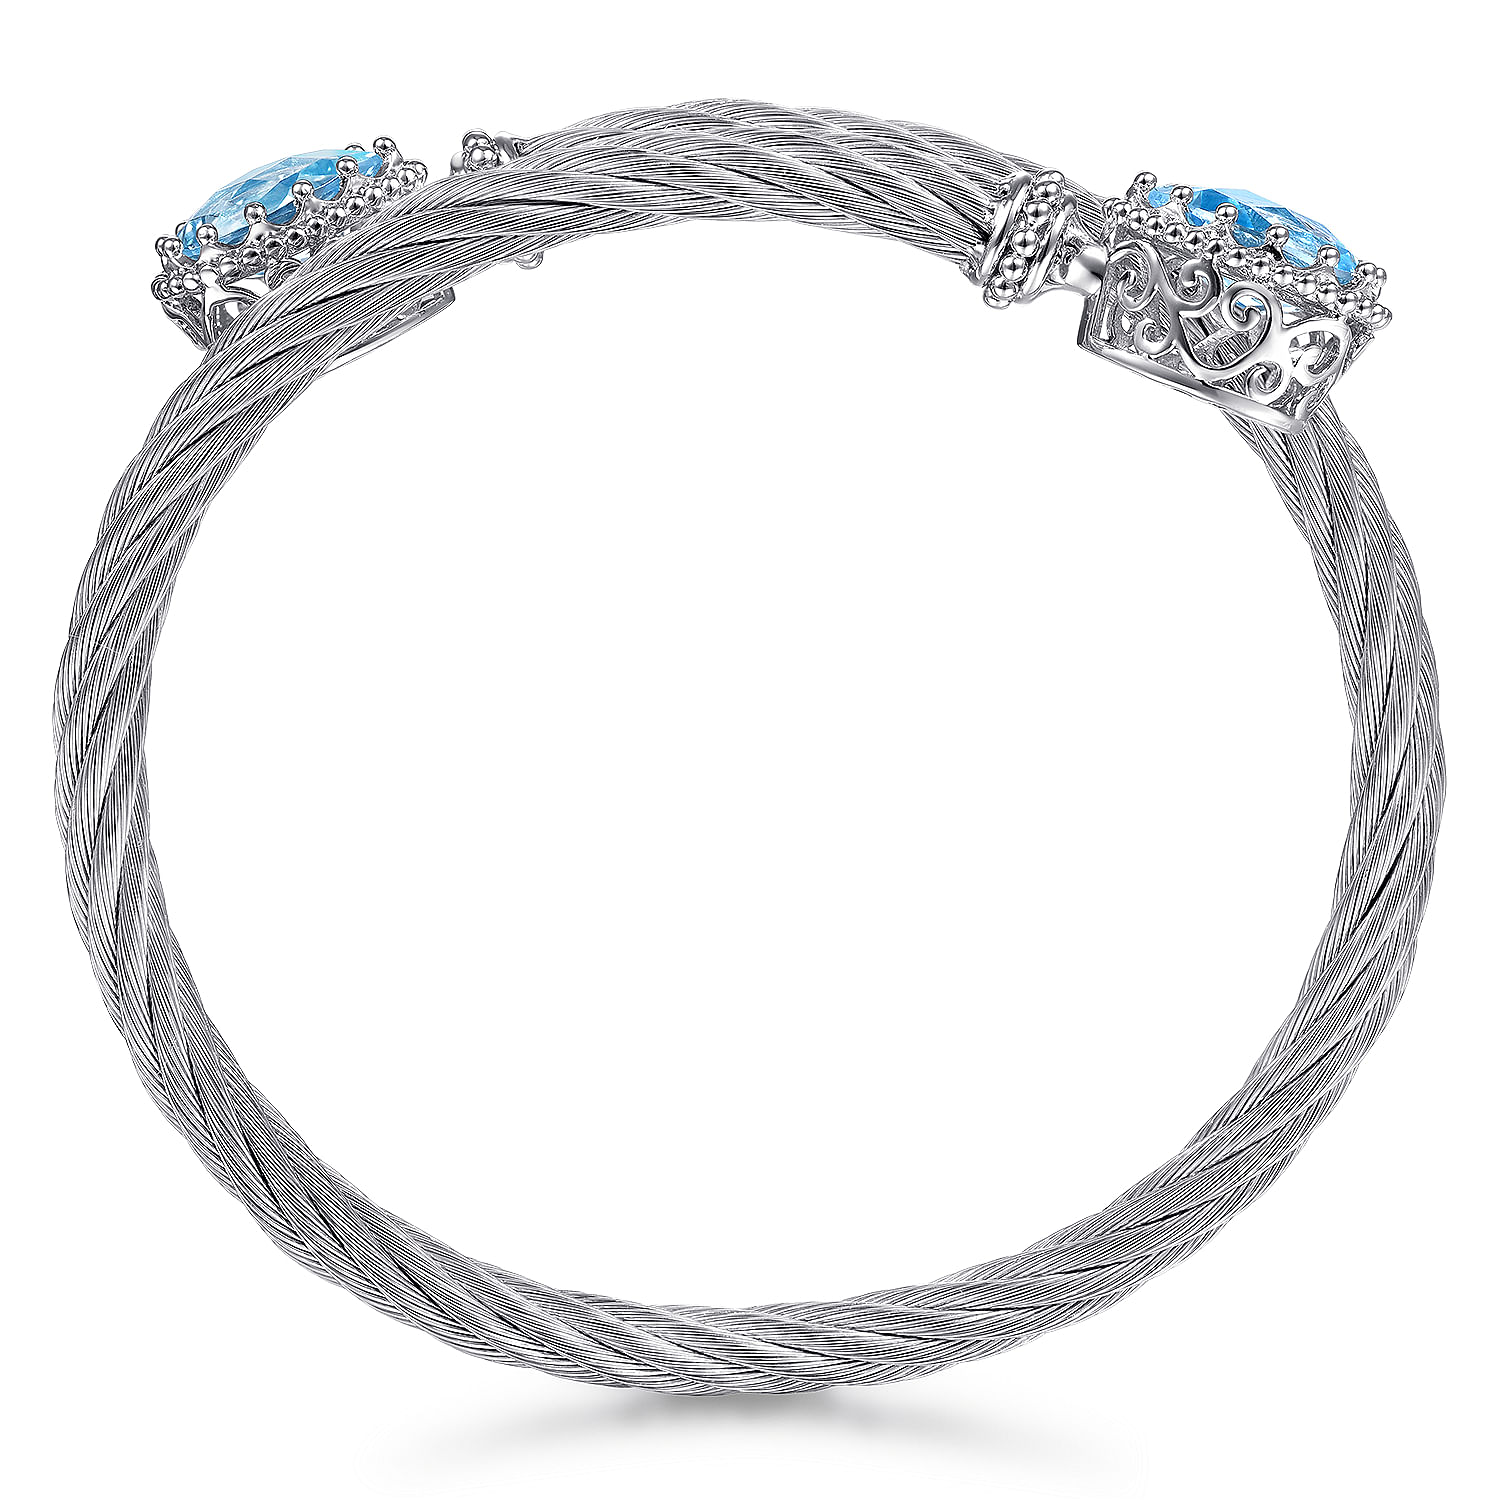 925-Sterling-Silver-and-Stainless-Steel-Twisted-Cable-Sky-Blue-Topaz-Bypass-Bangle3